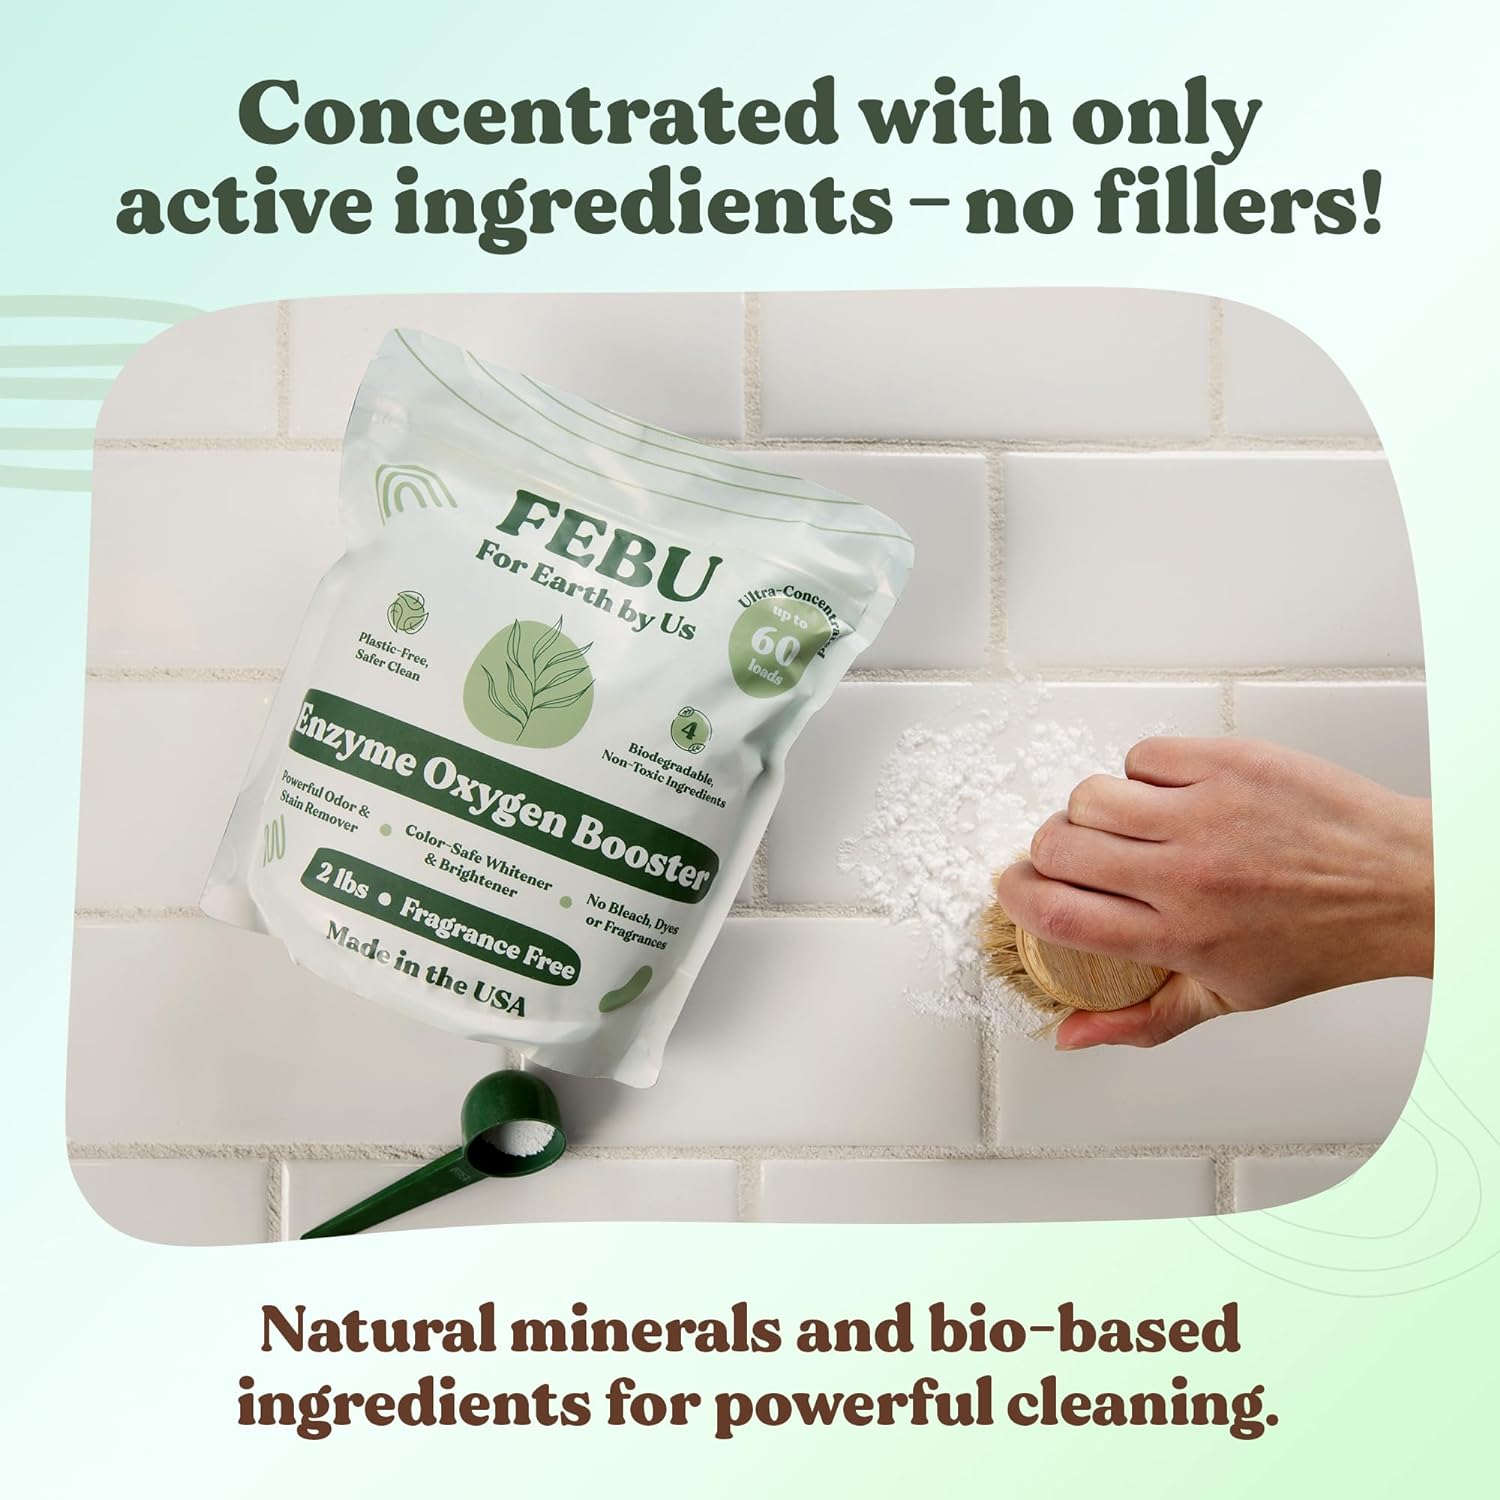 FEBU Enzyme Oxygen Laundry Booster, Fragrance Free, 2lbs | Natural Stain Remover | Powder Detergent Booster | Enzyme Clothing Stain Remover | Plant-Based No Filler Ingredients | Human Safe Made in USA : Health & Household